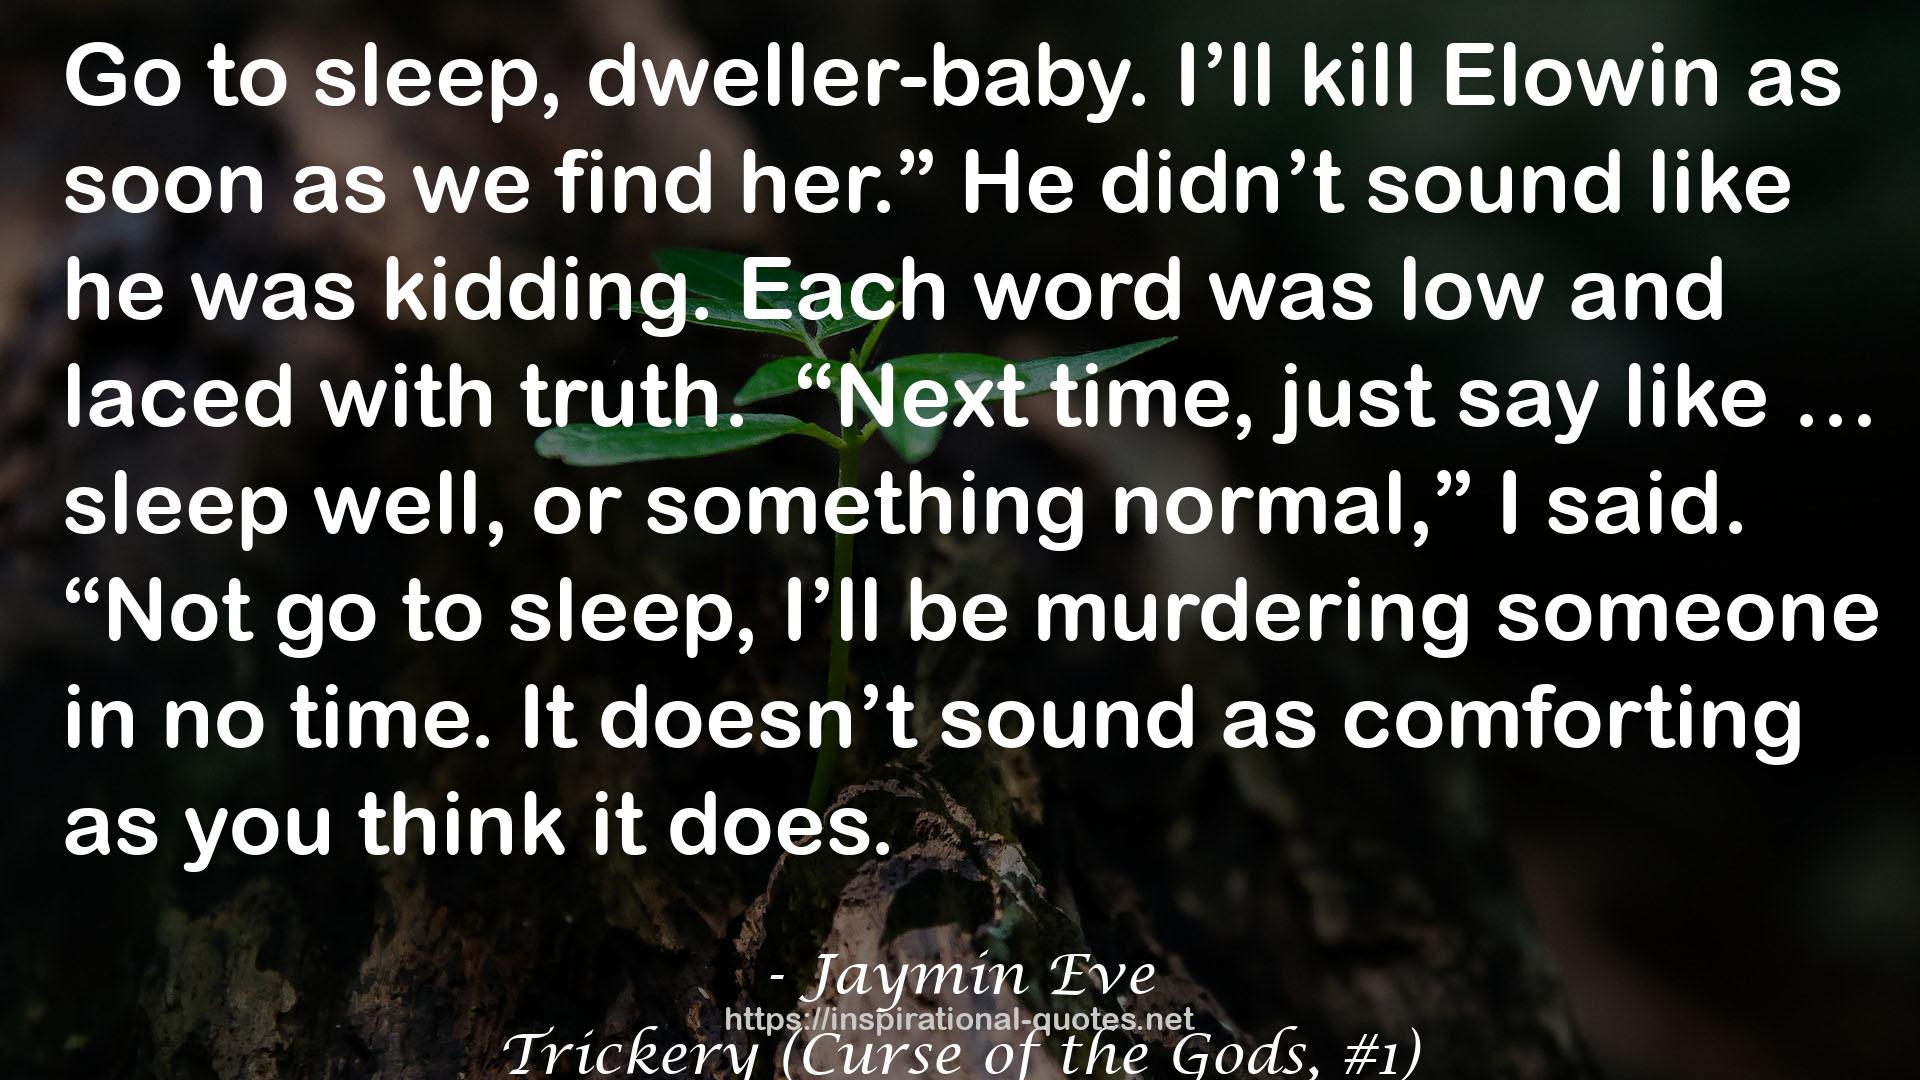 Trickery (Curse of the Gods, #1) QUOTES